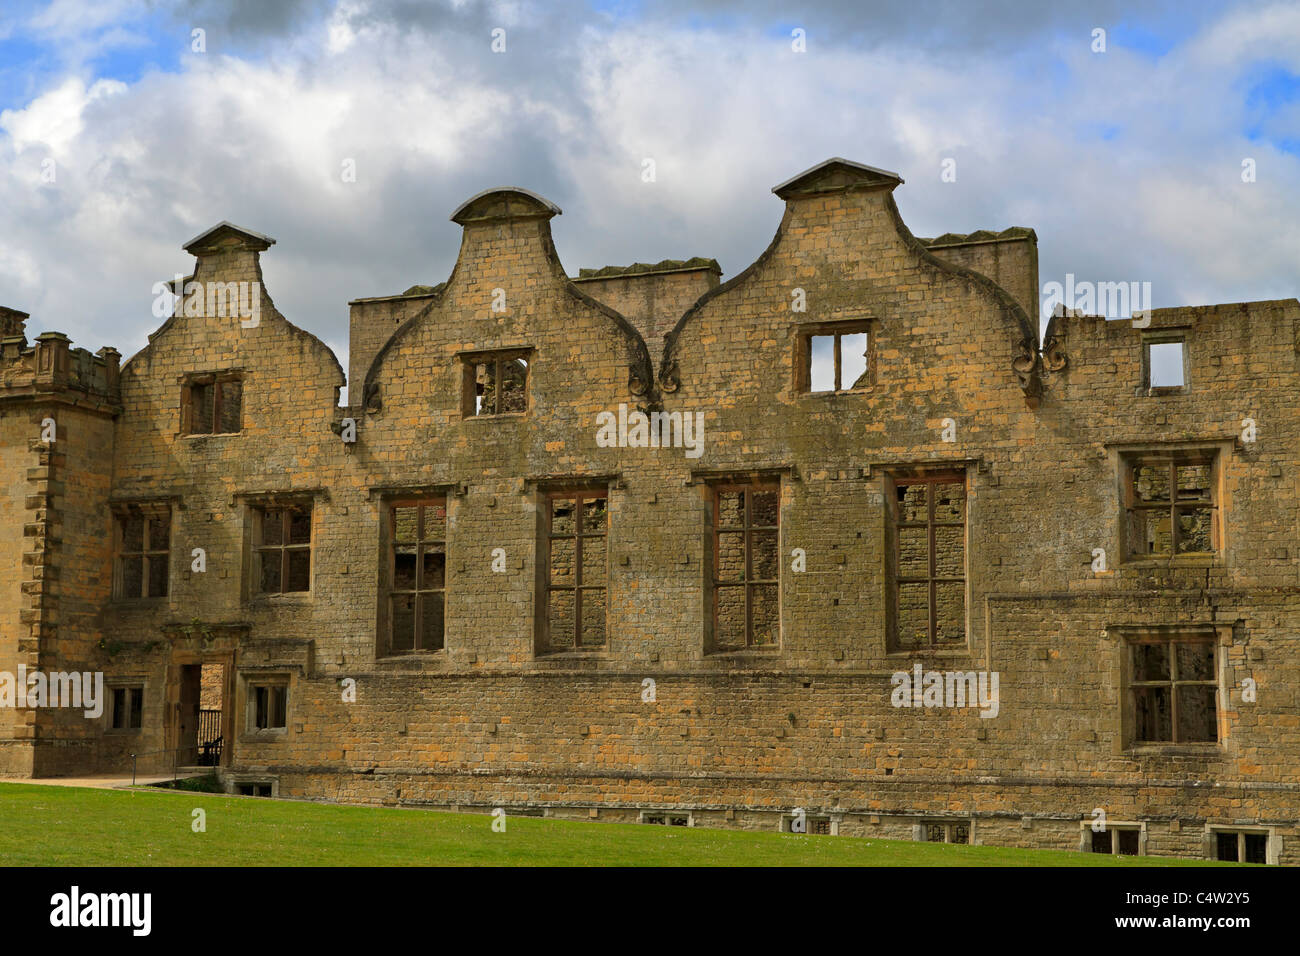 Bolsover Castle, Derbyshire. Curved Gables of the Great Hall of the Terrace Range on a stormy afternoon. Stock Photo